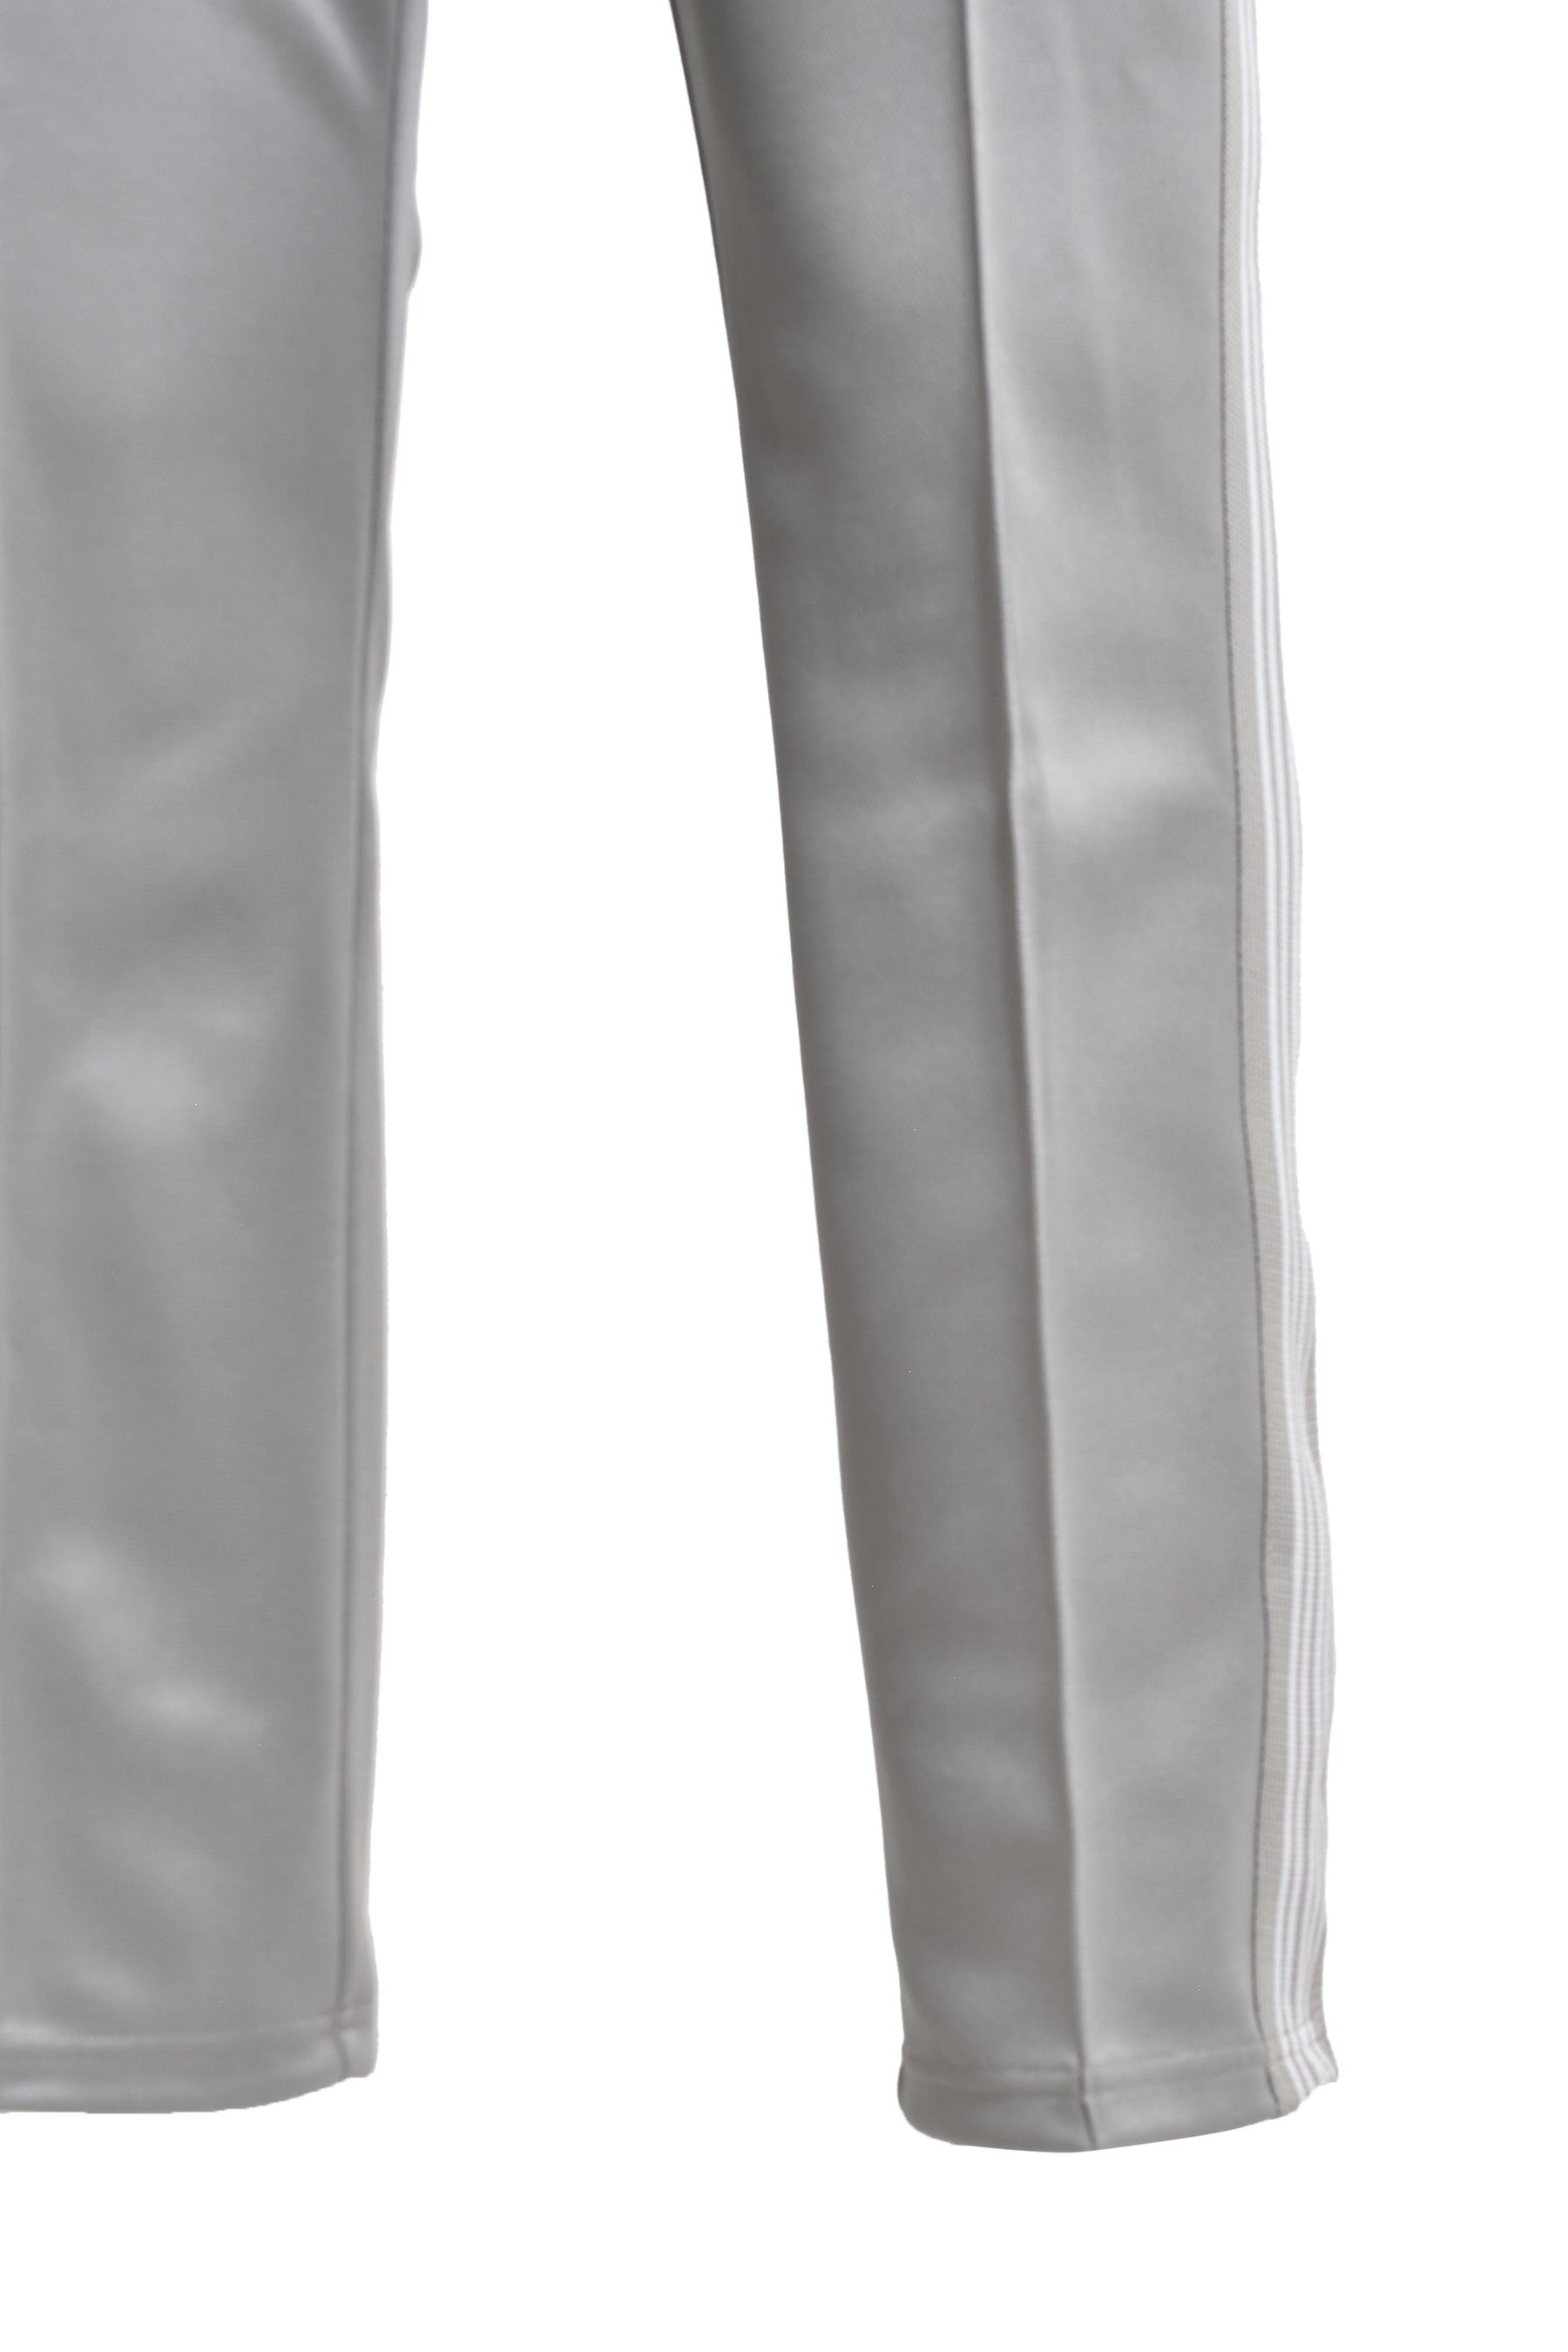 NARROW TRACK PANT - POLY SMOOTH (EXCLUSIVE) / GRY GRY WHT